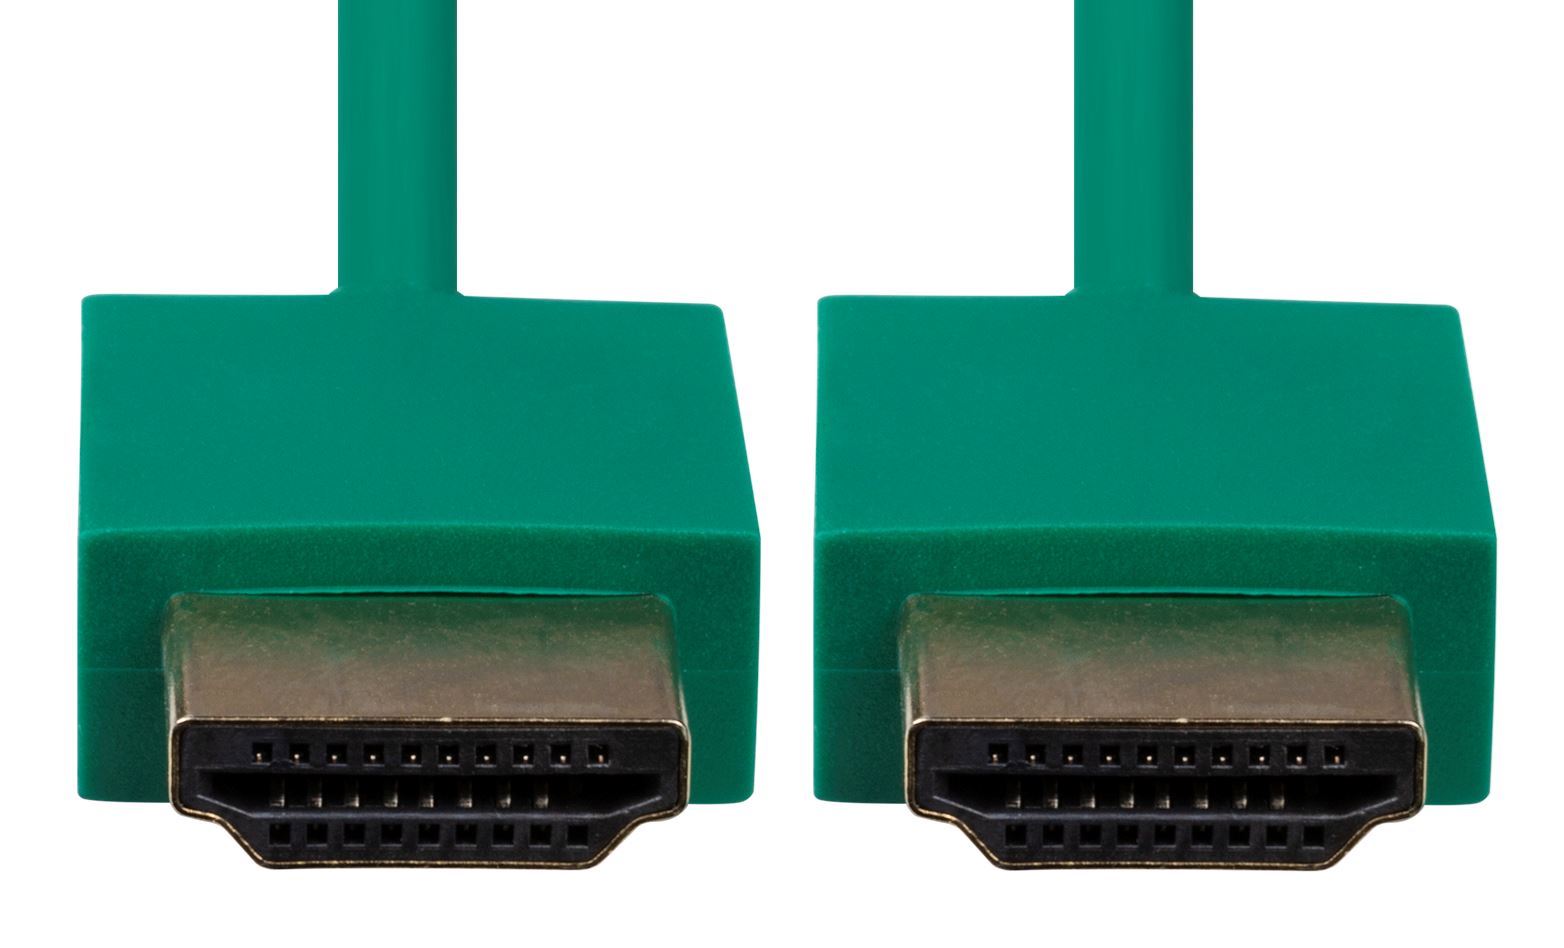 DYNAMIX_3M_HDMI_GREEN_Nano_High_Speed_With_Ethernet_Cable._Designed_for_UHD_Display_up_to_4K2K@60Hz._Slimline_Robust_Cable._Supports_CEC_2.0,_3D,_&_ARC._Supports_Up_to_32_Audio_Channels. 764